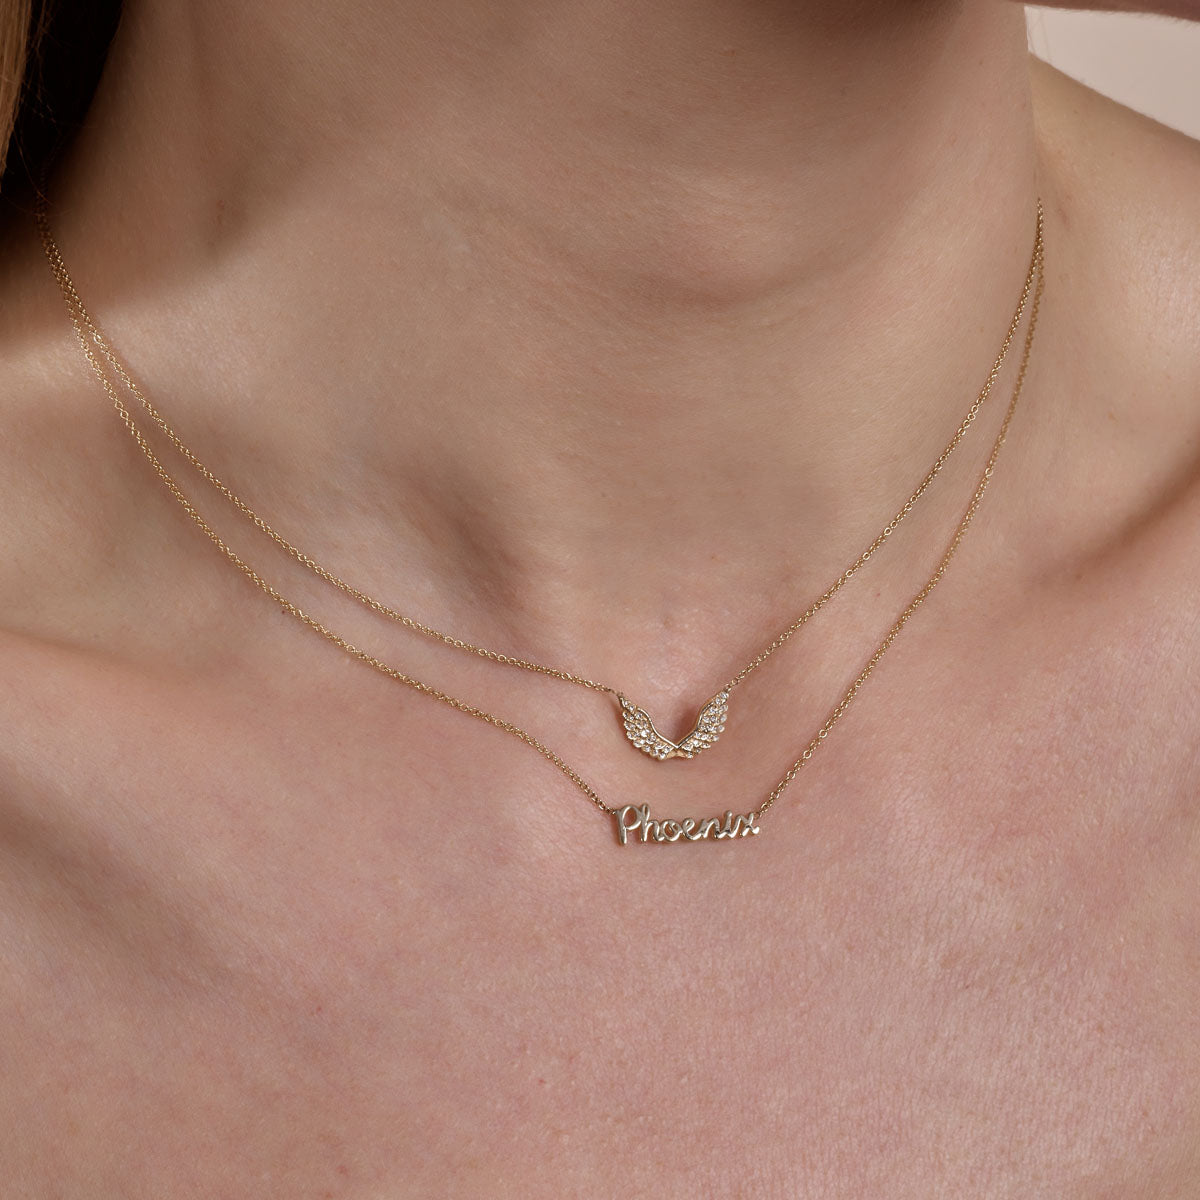 gold diamond angel wings necklace and gold cursive phoenix necklace on neck